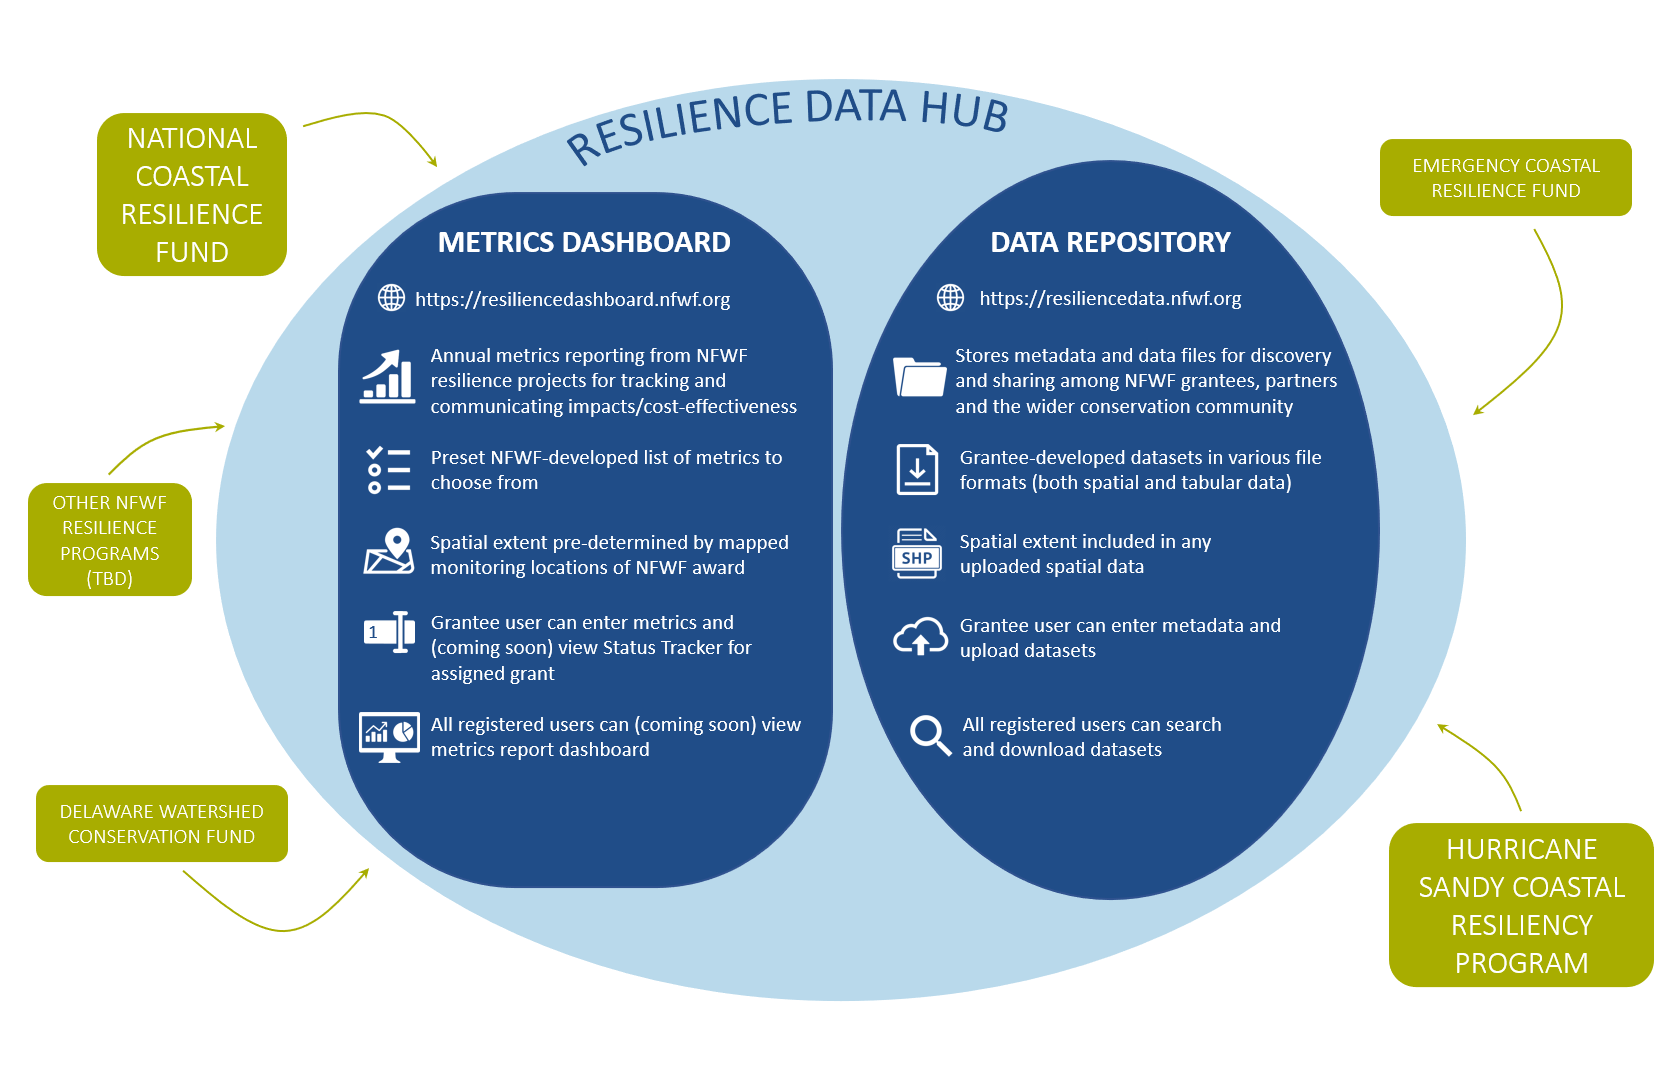 Map of Resilience Data Hub including the Metrics Database and Data Repository